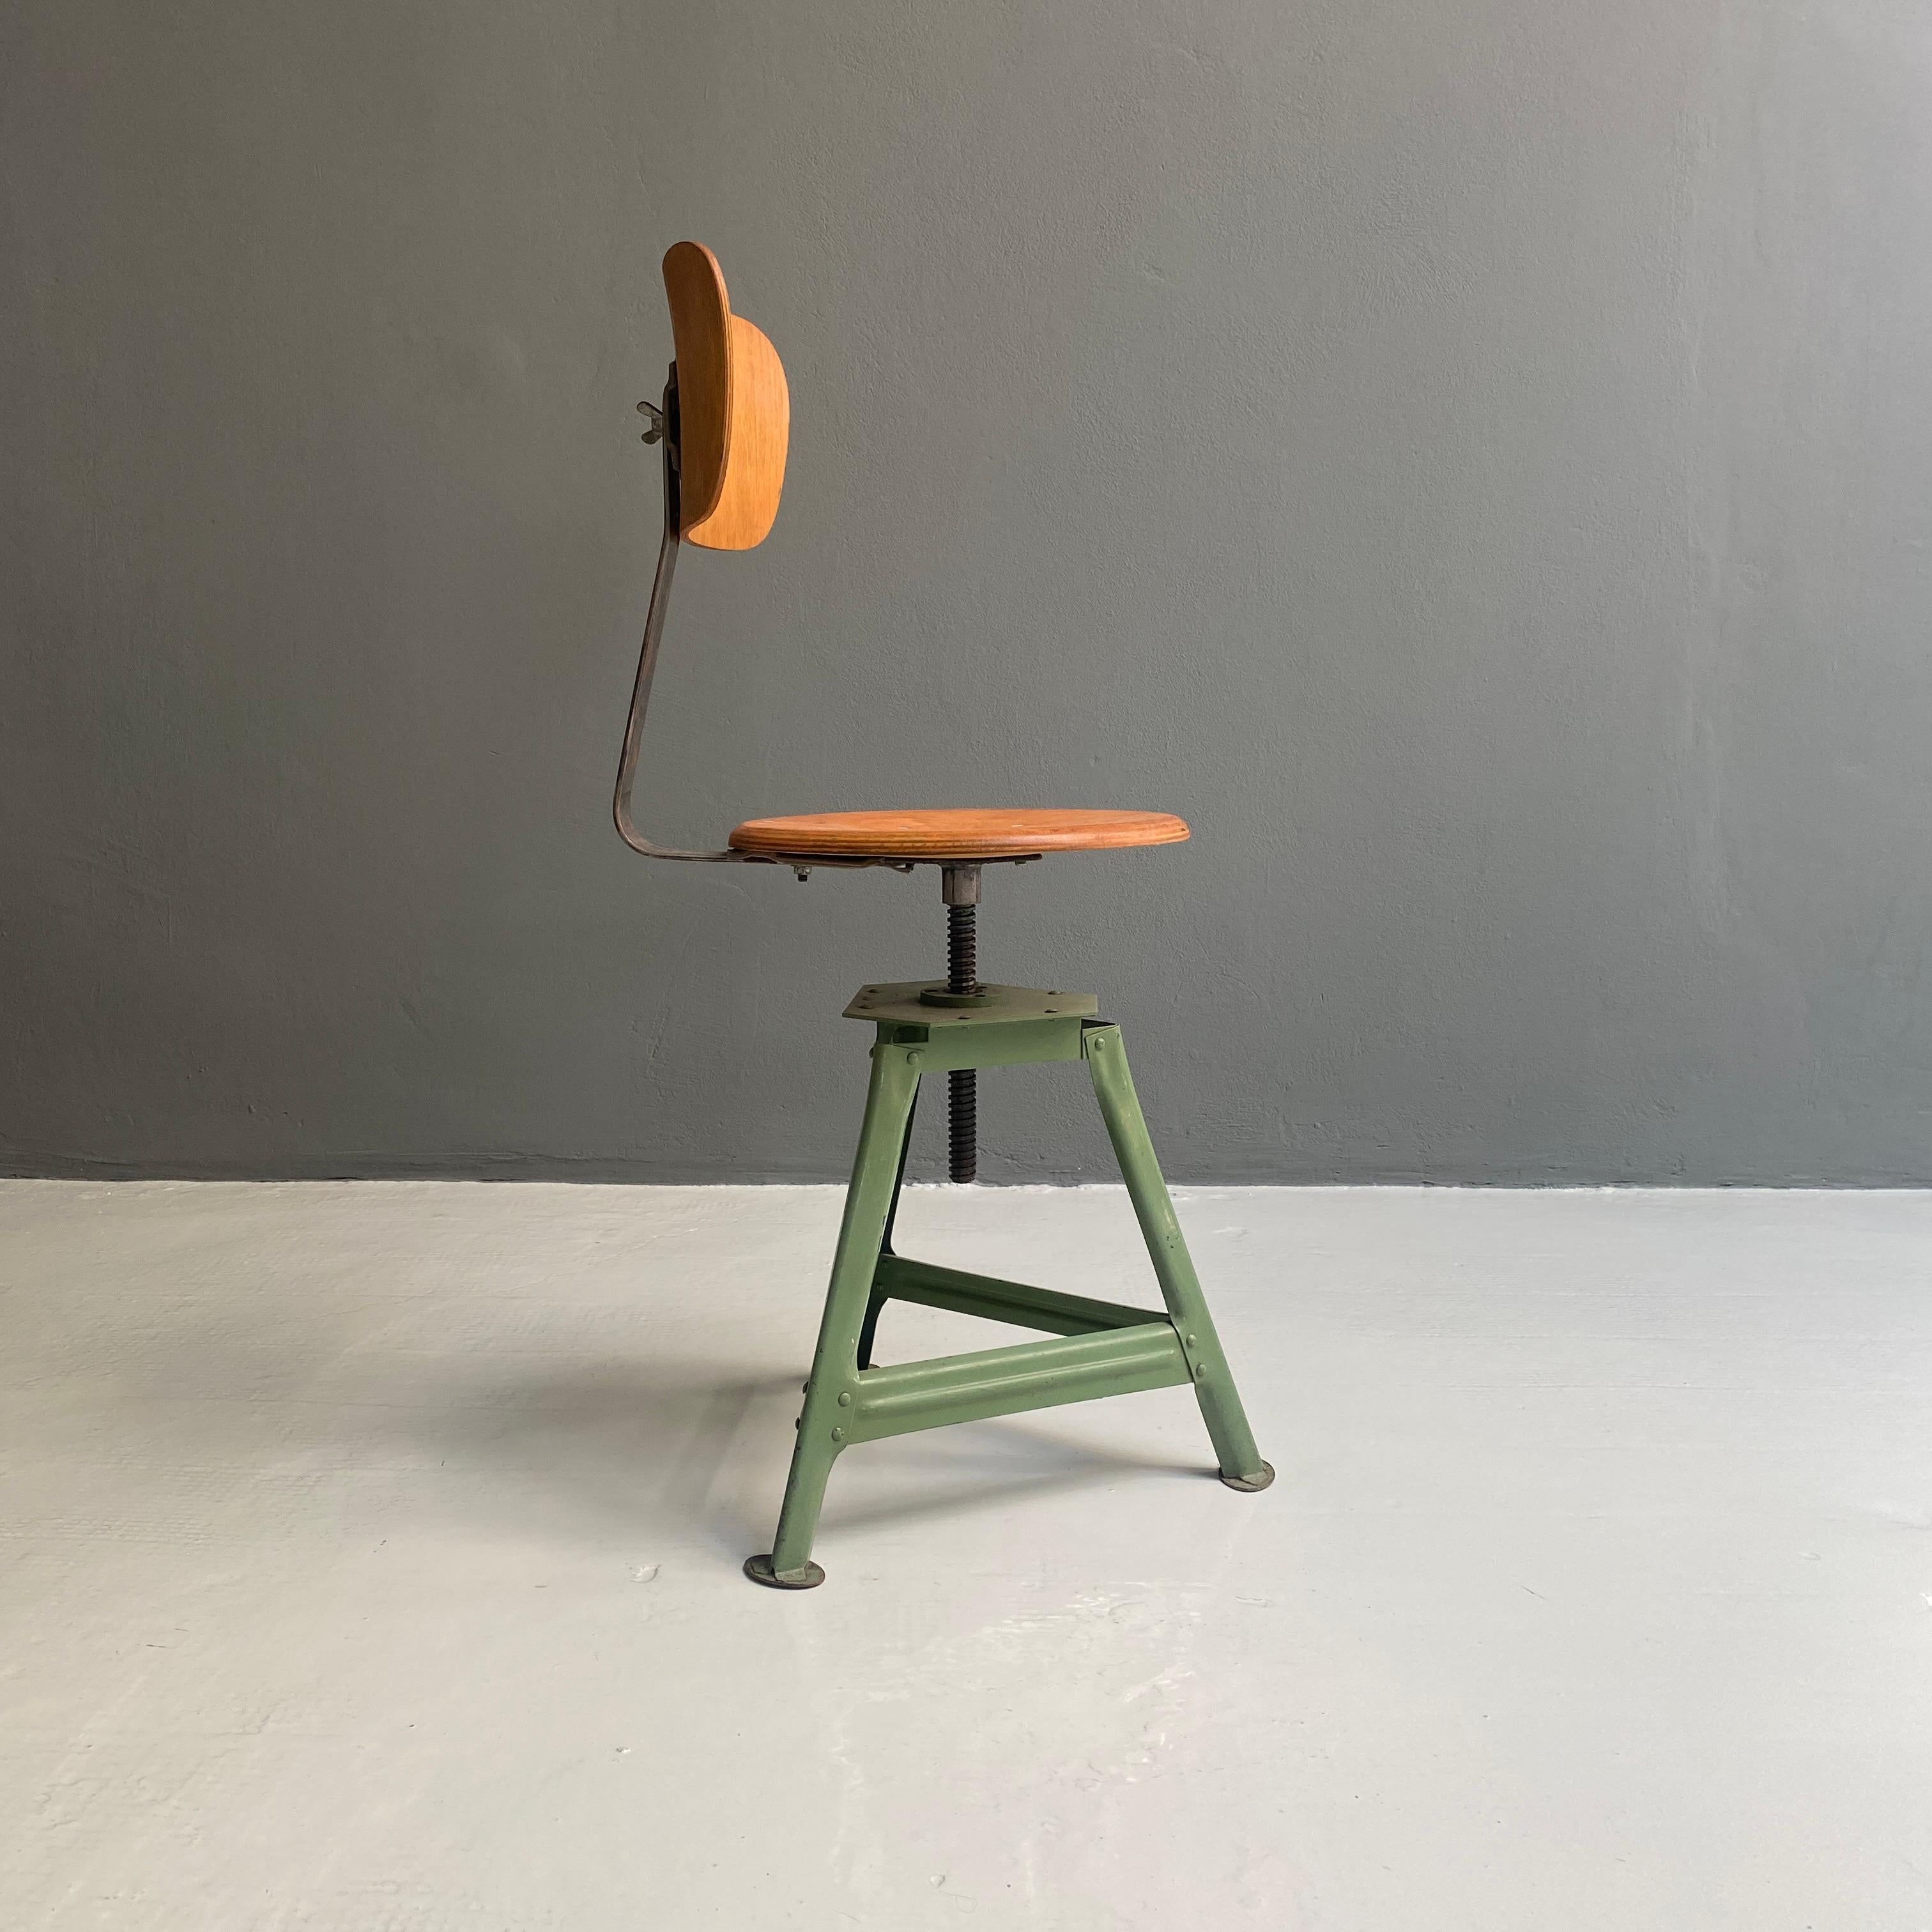 Industrial wood and metal chair, 1930s.
Industrial chair with backrest and adjustable seat in shaped plywood and frame in riveted steel and painted green at the base.
1930s.

Good conditions.

Measurements in cm 40 x 47 x 86 H.